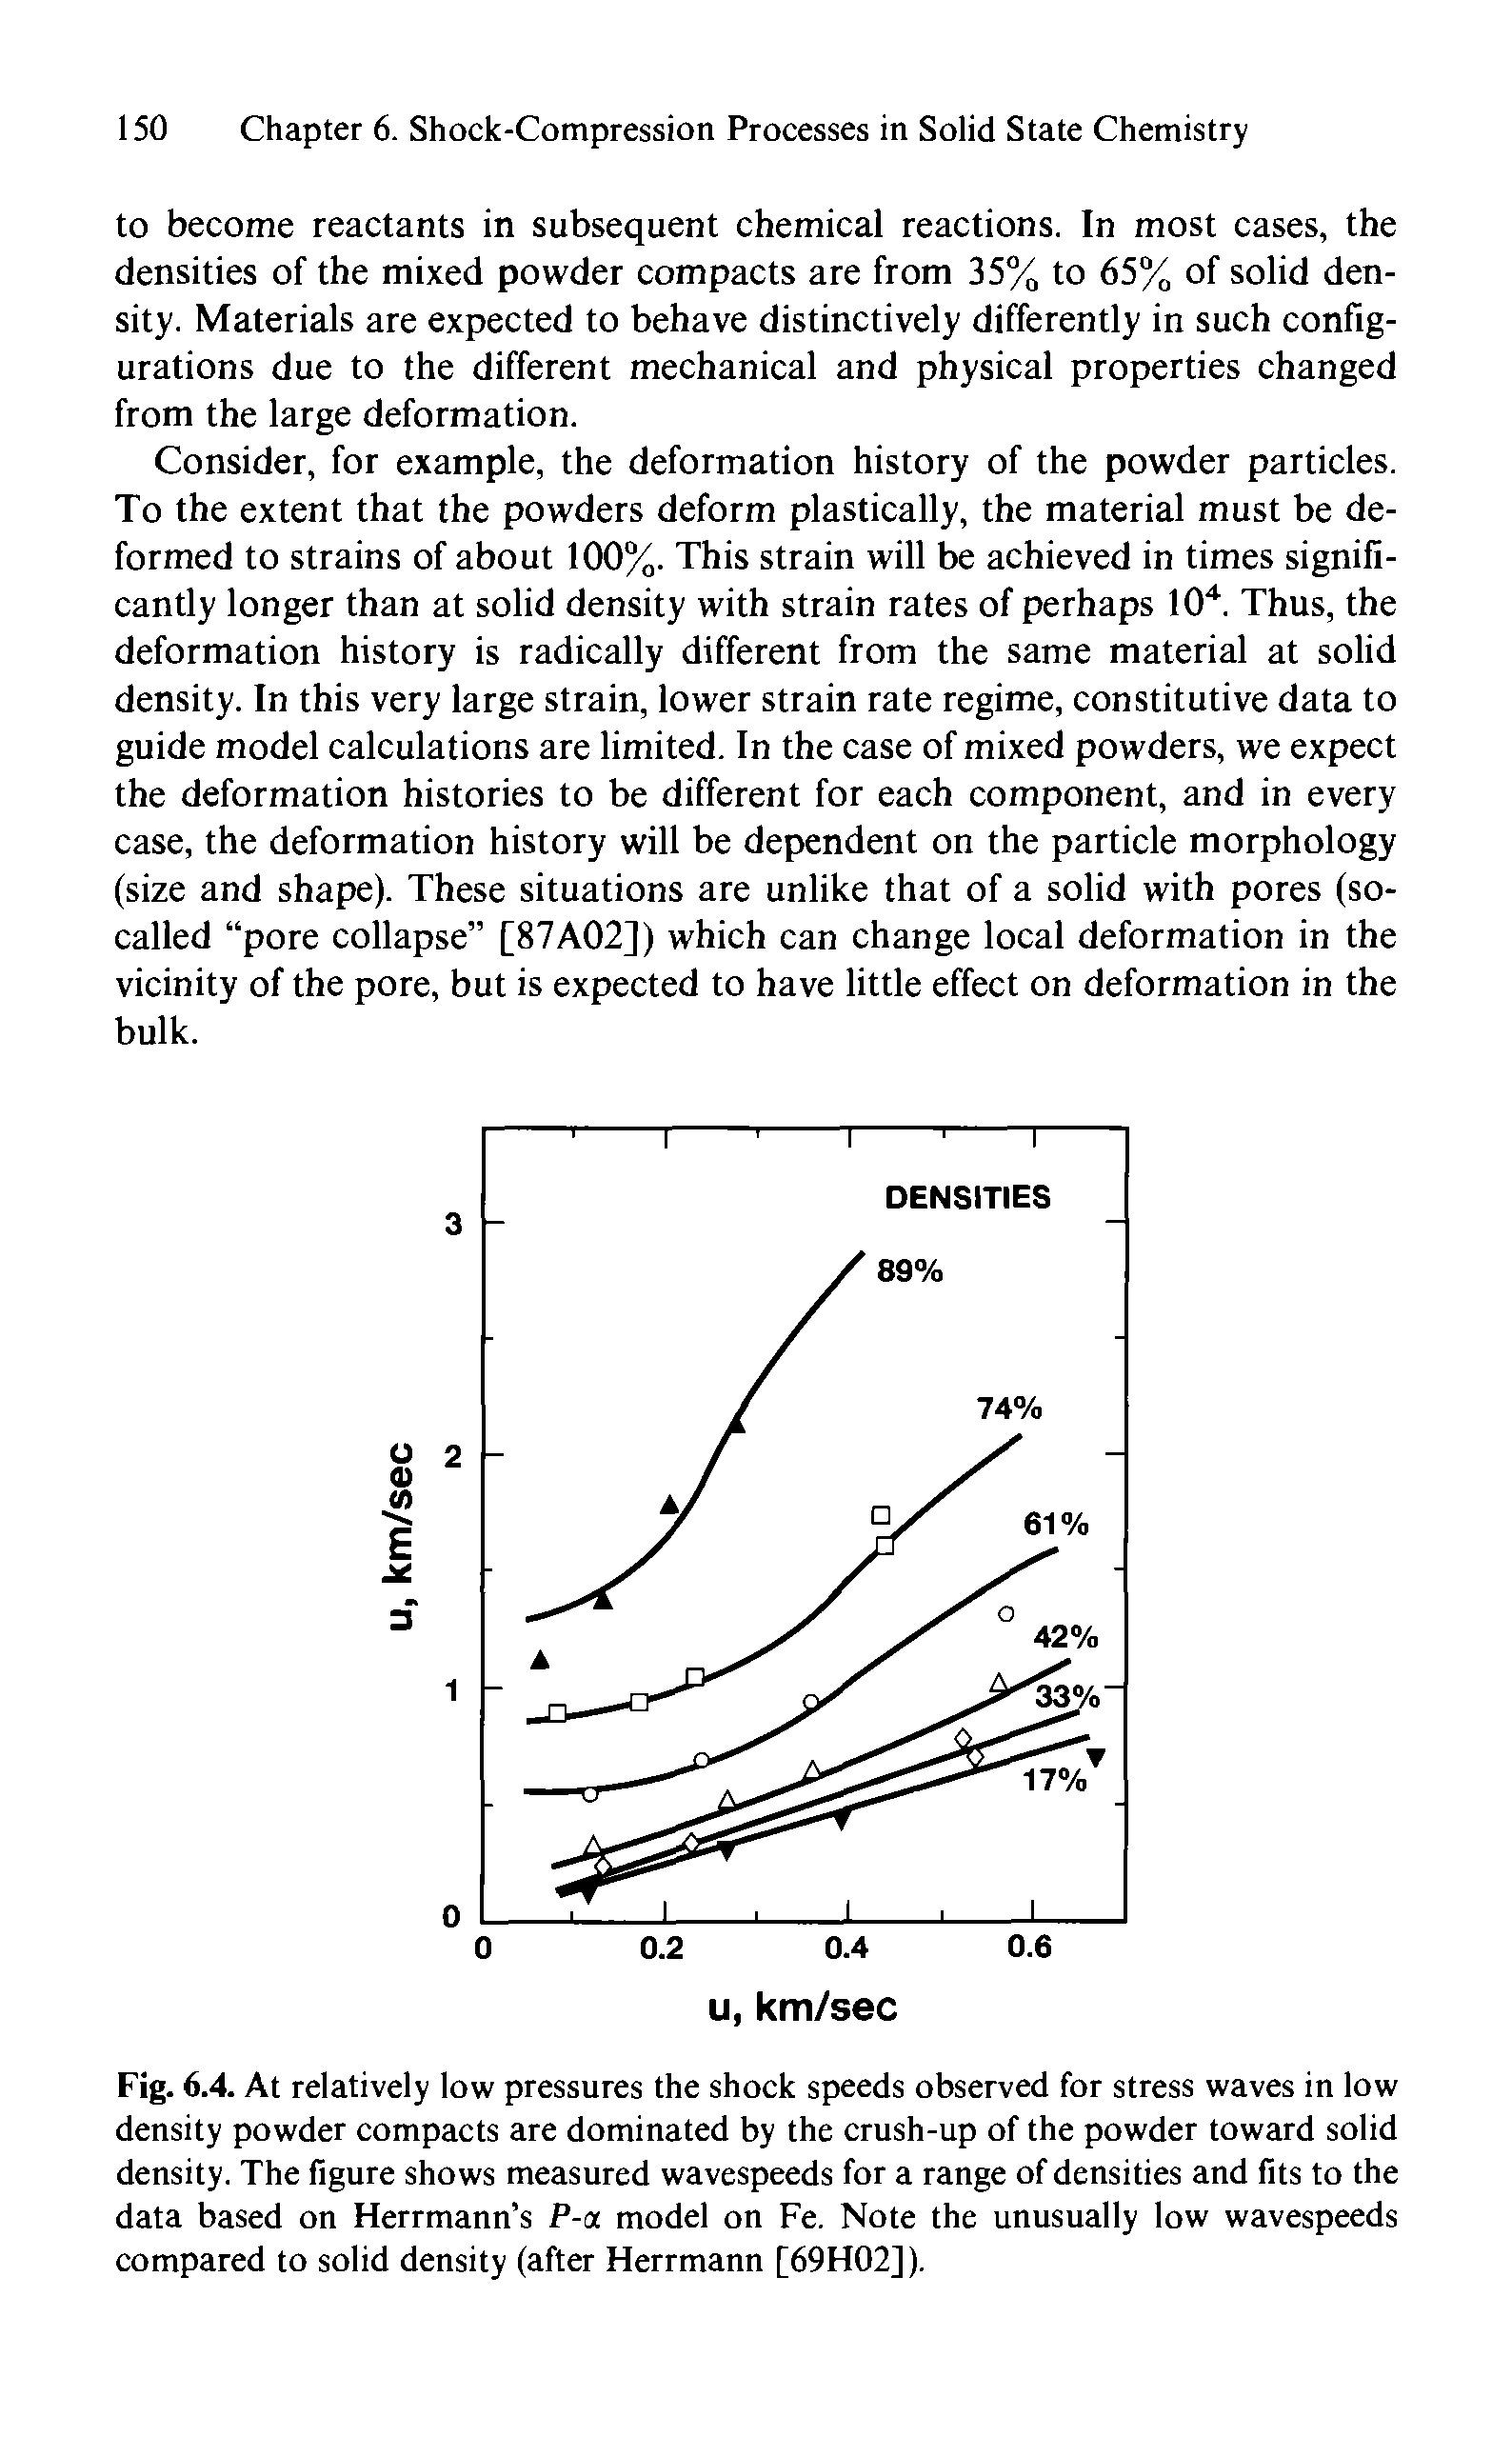 Fig. 6.4. At relatively low pressures the shock speeds observed for stress waves in low density powder compacts are dominated by the crush-up of the powder toward solid density. The figure shows measured wavespeeds for a range of densities and fits to the data based on Herrmann s P-a model on Fe. Note the unusually low wavespeeds compared to solid density (after Herrmann [69H02]).